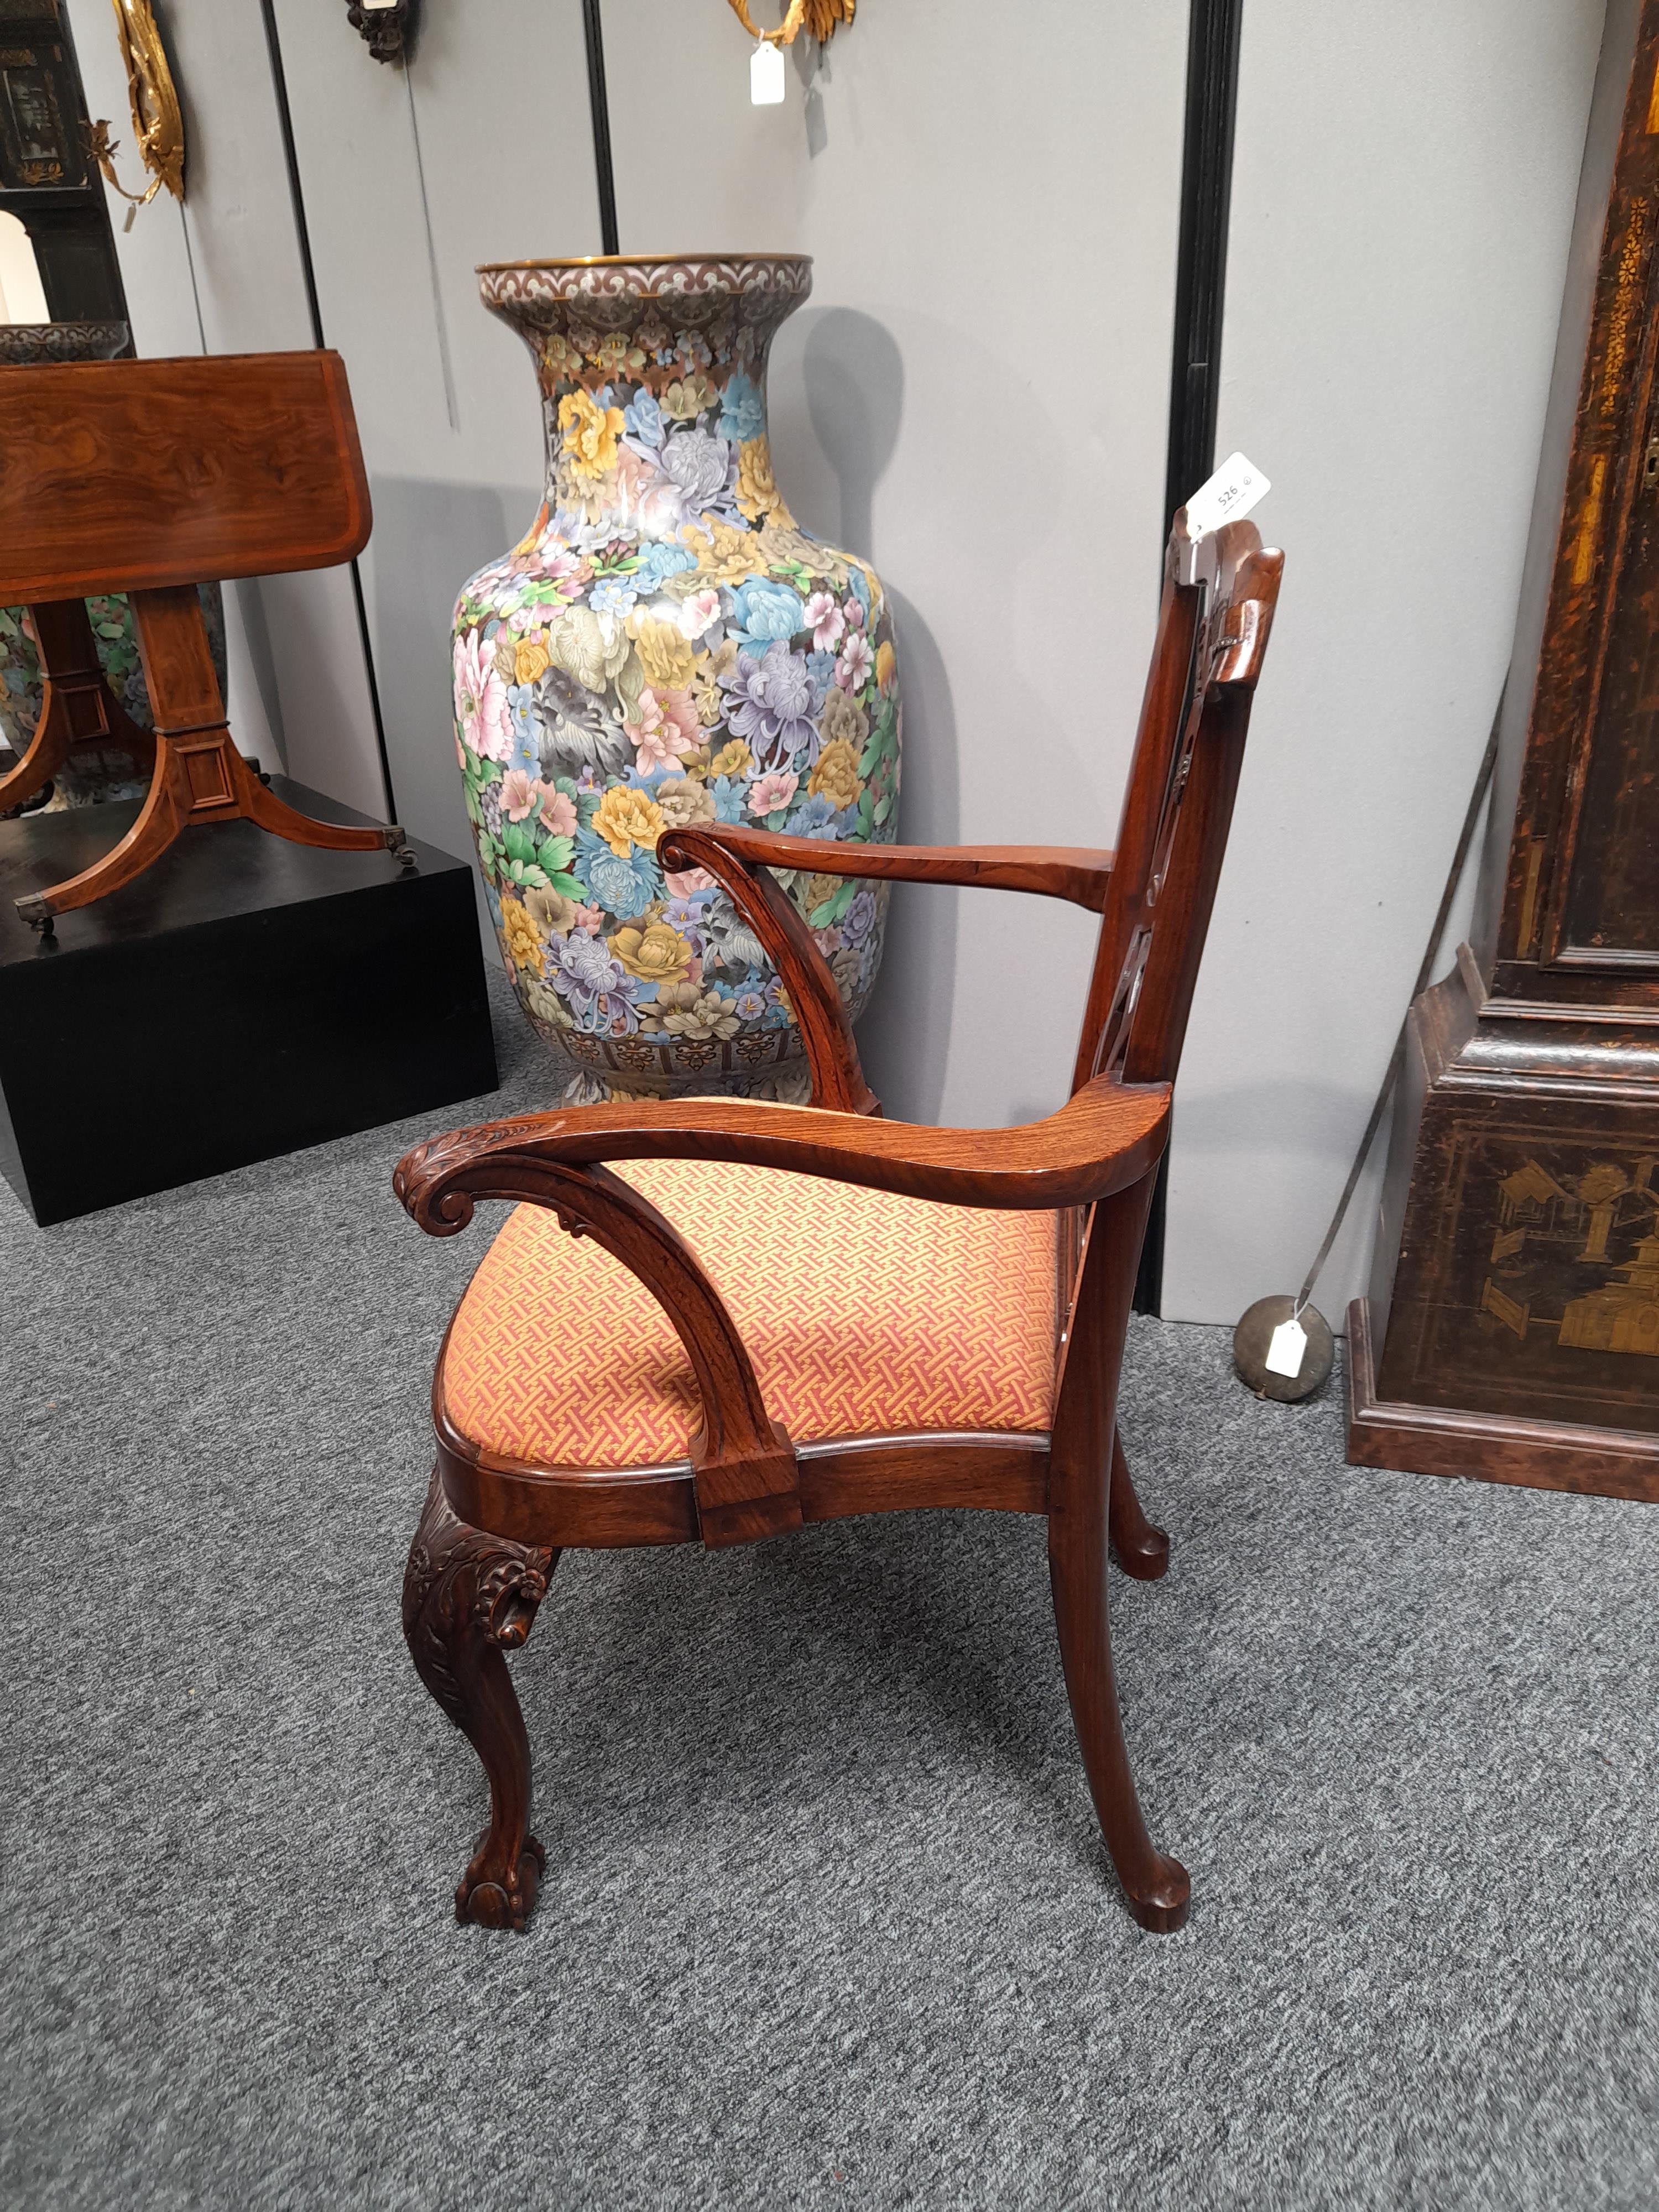 A RARE PAIR OF ANGLO-CHINESE EXPORT PADOUK ARMCHAIRS IN IRISH STYLE, MID-18TH CENTURY each with a - Image 34 of 77